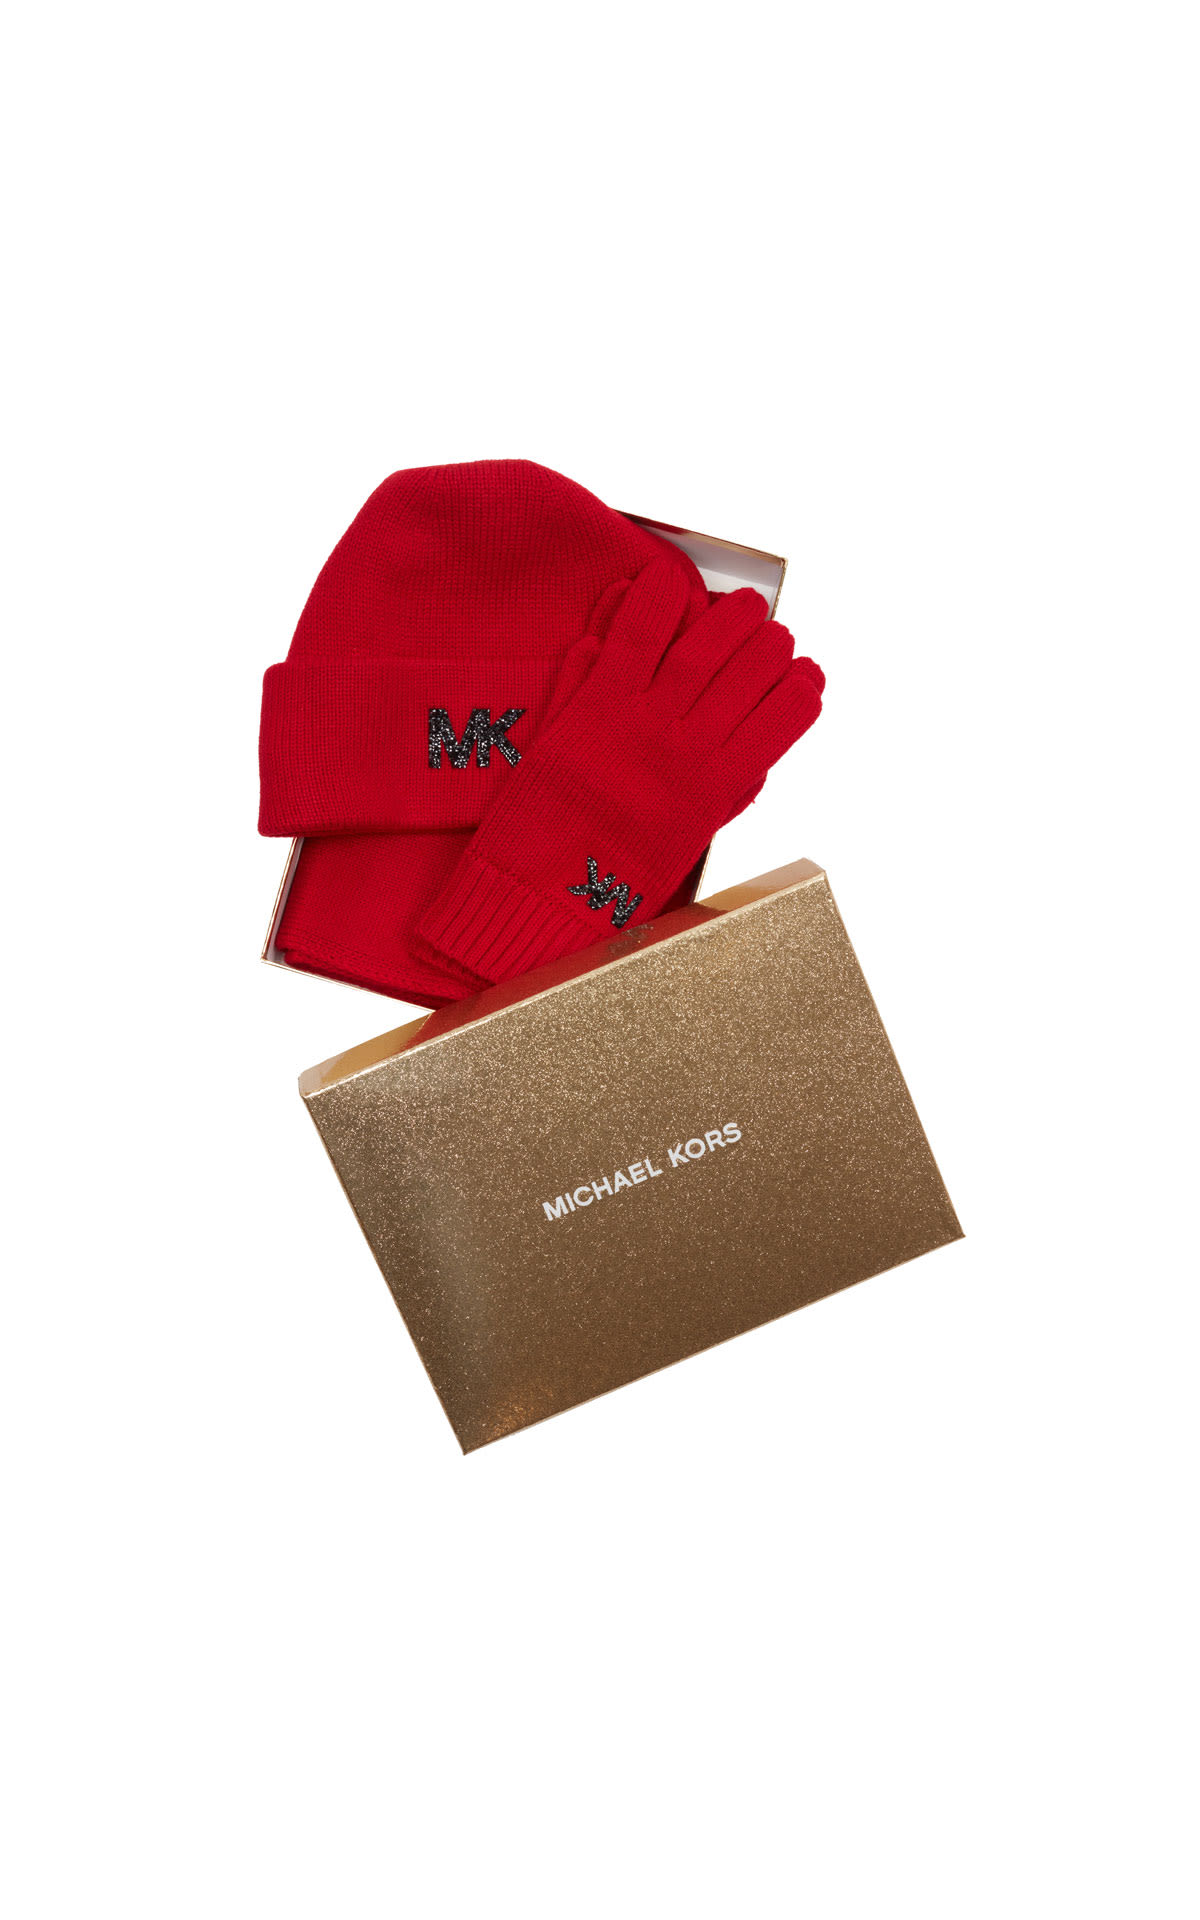 Micheal Kors Gift box hat and gloves from Bicester Village